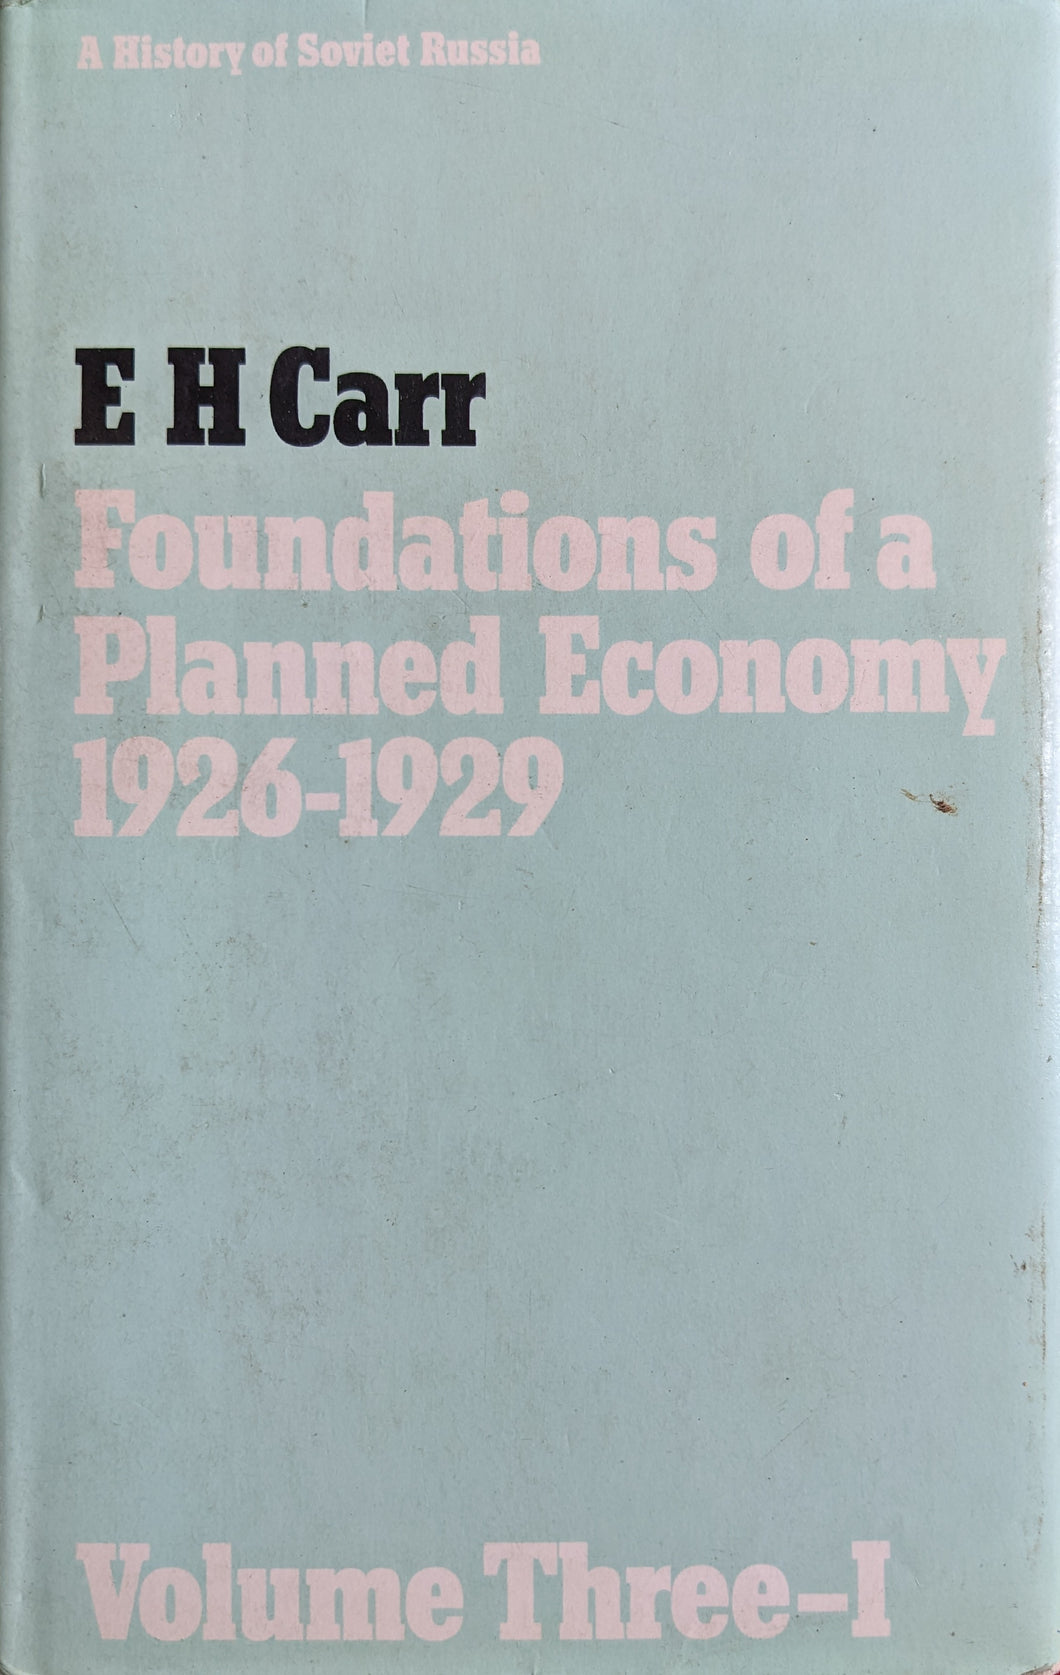 Foundations of a Planned Economy, 1926-1929, Volume 3-I